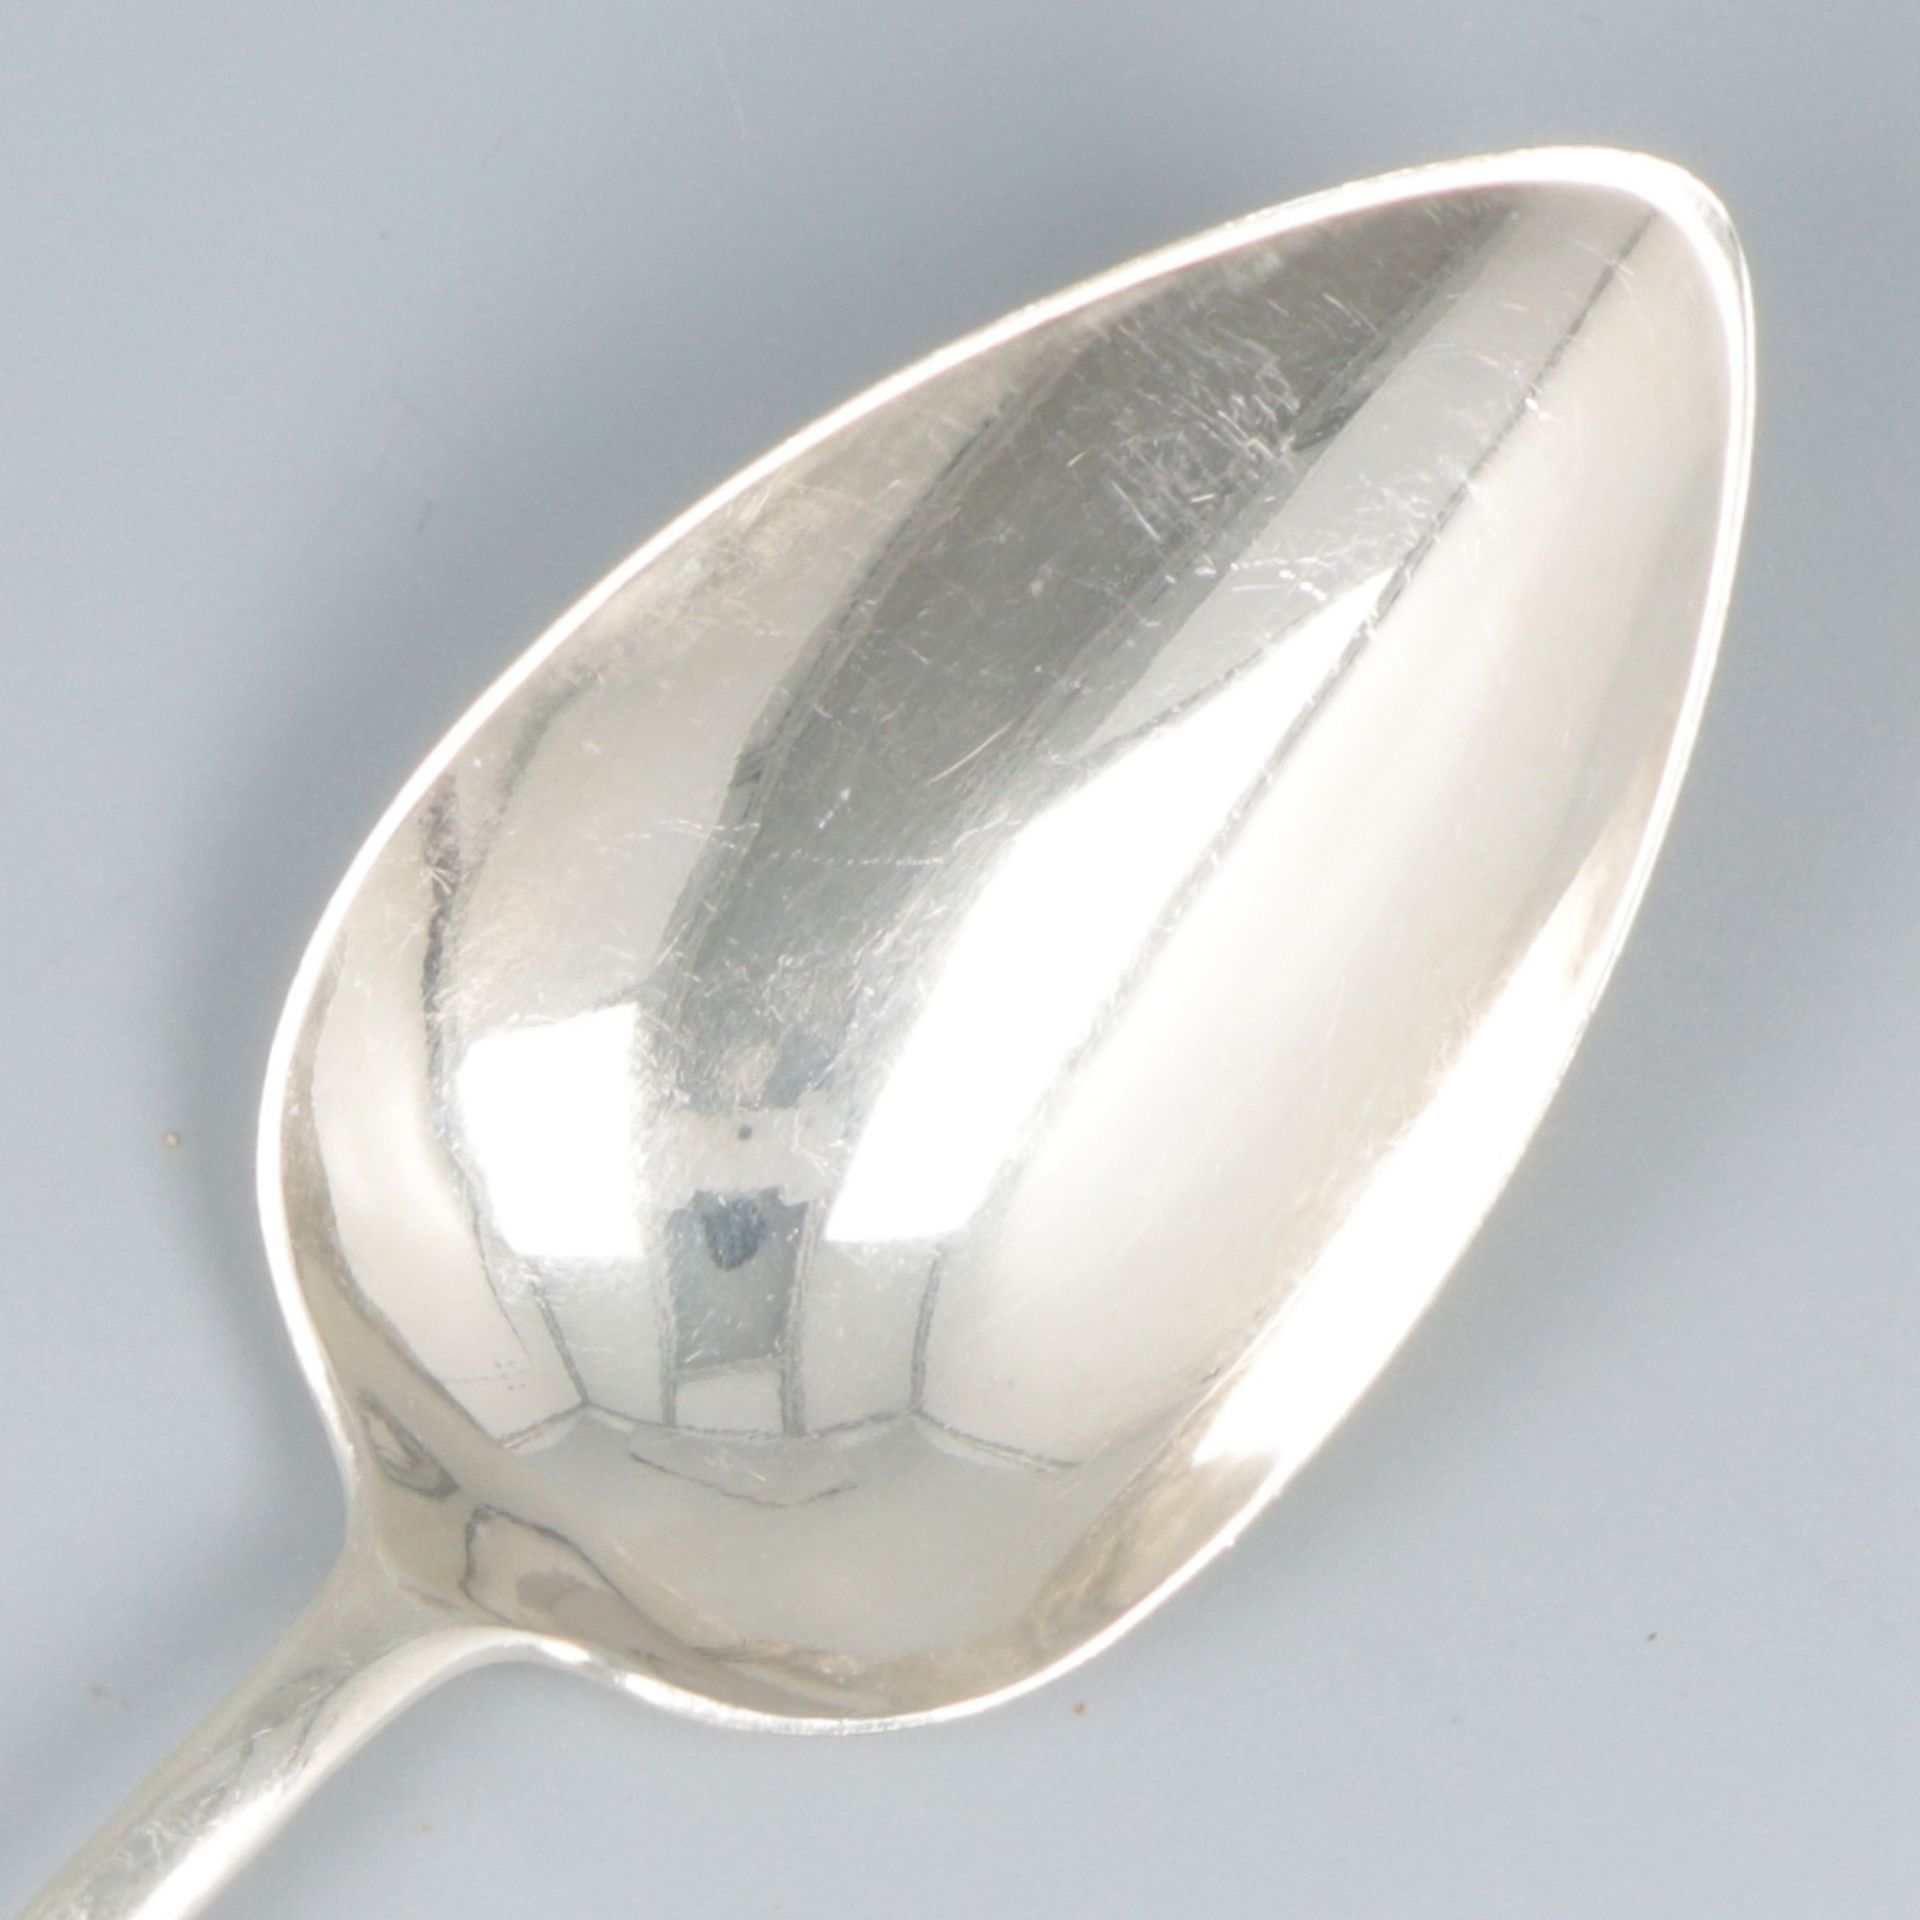 2-piece set vegetable serving spoons "Haags Lofje", silver. - Image 4 of 6